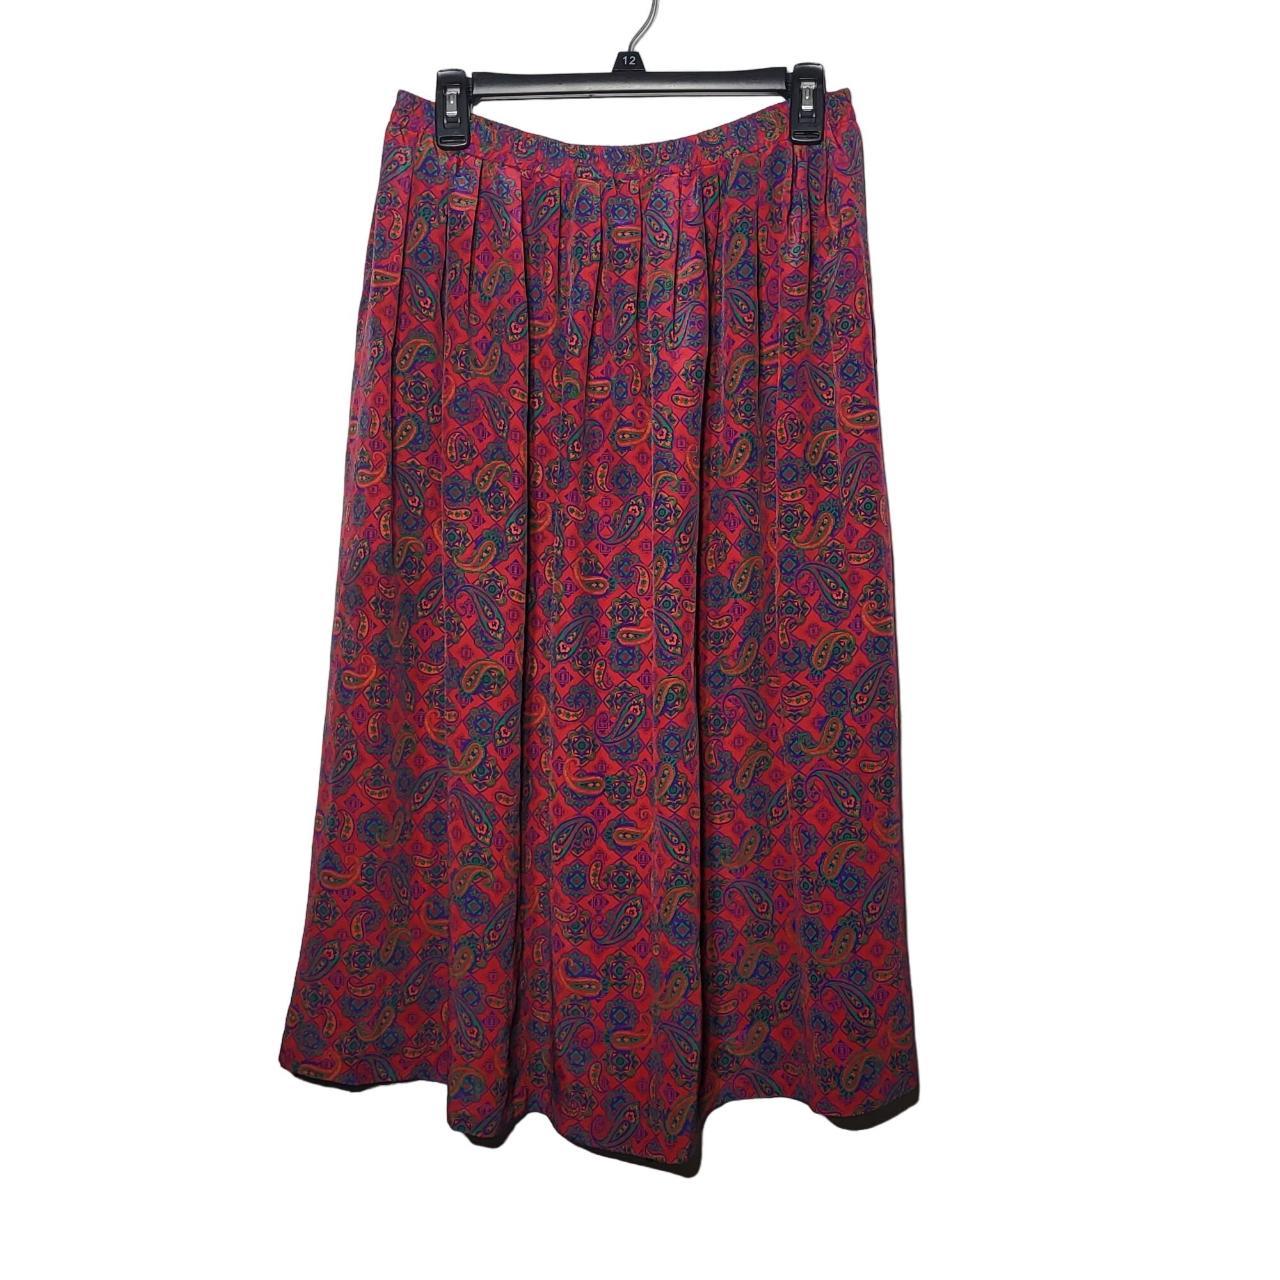 Leslie Fay Women's Red and Blue Skirt | Depop